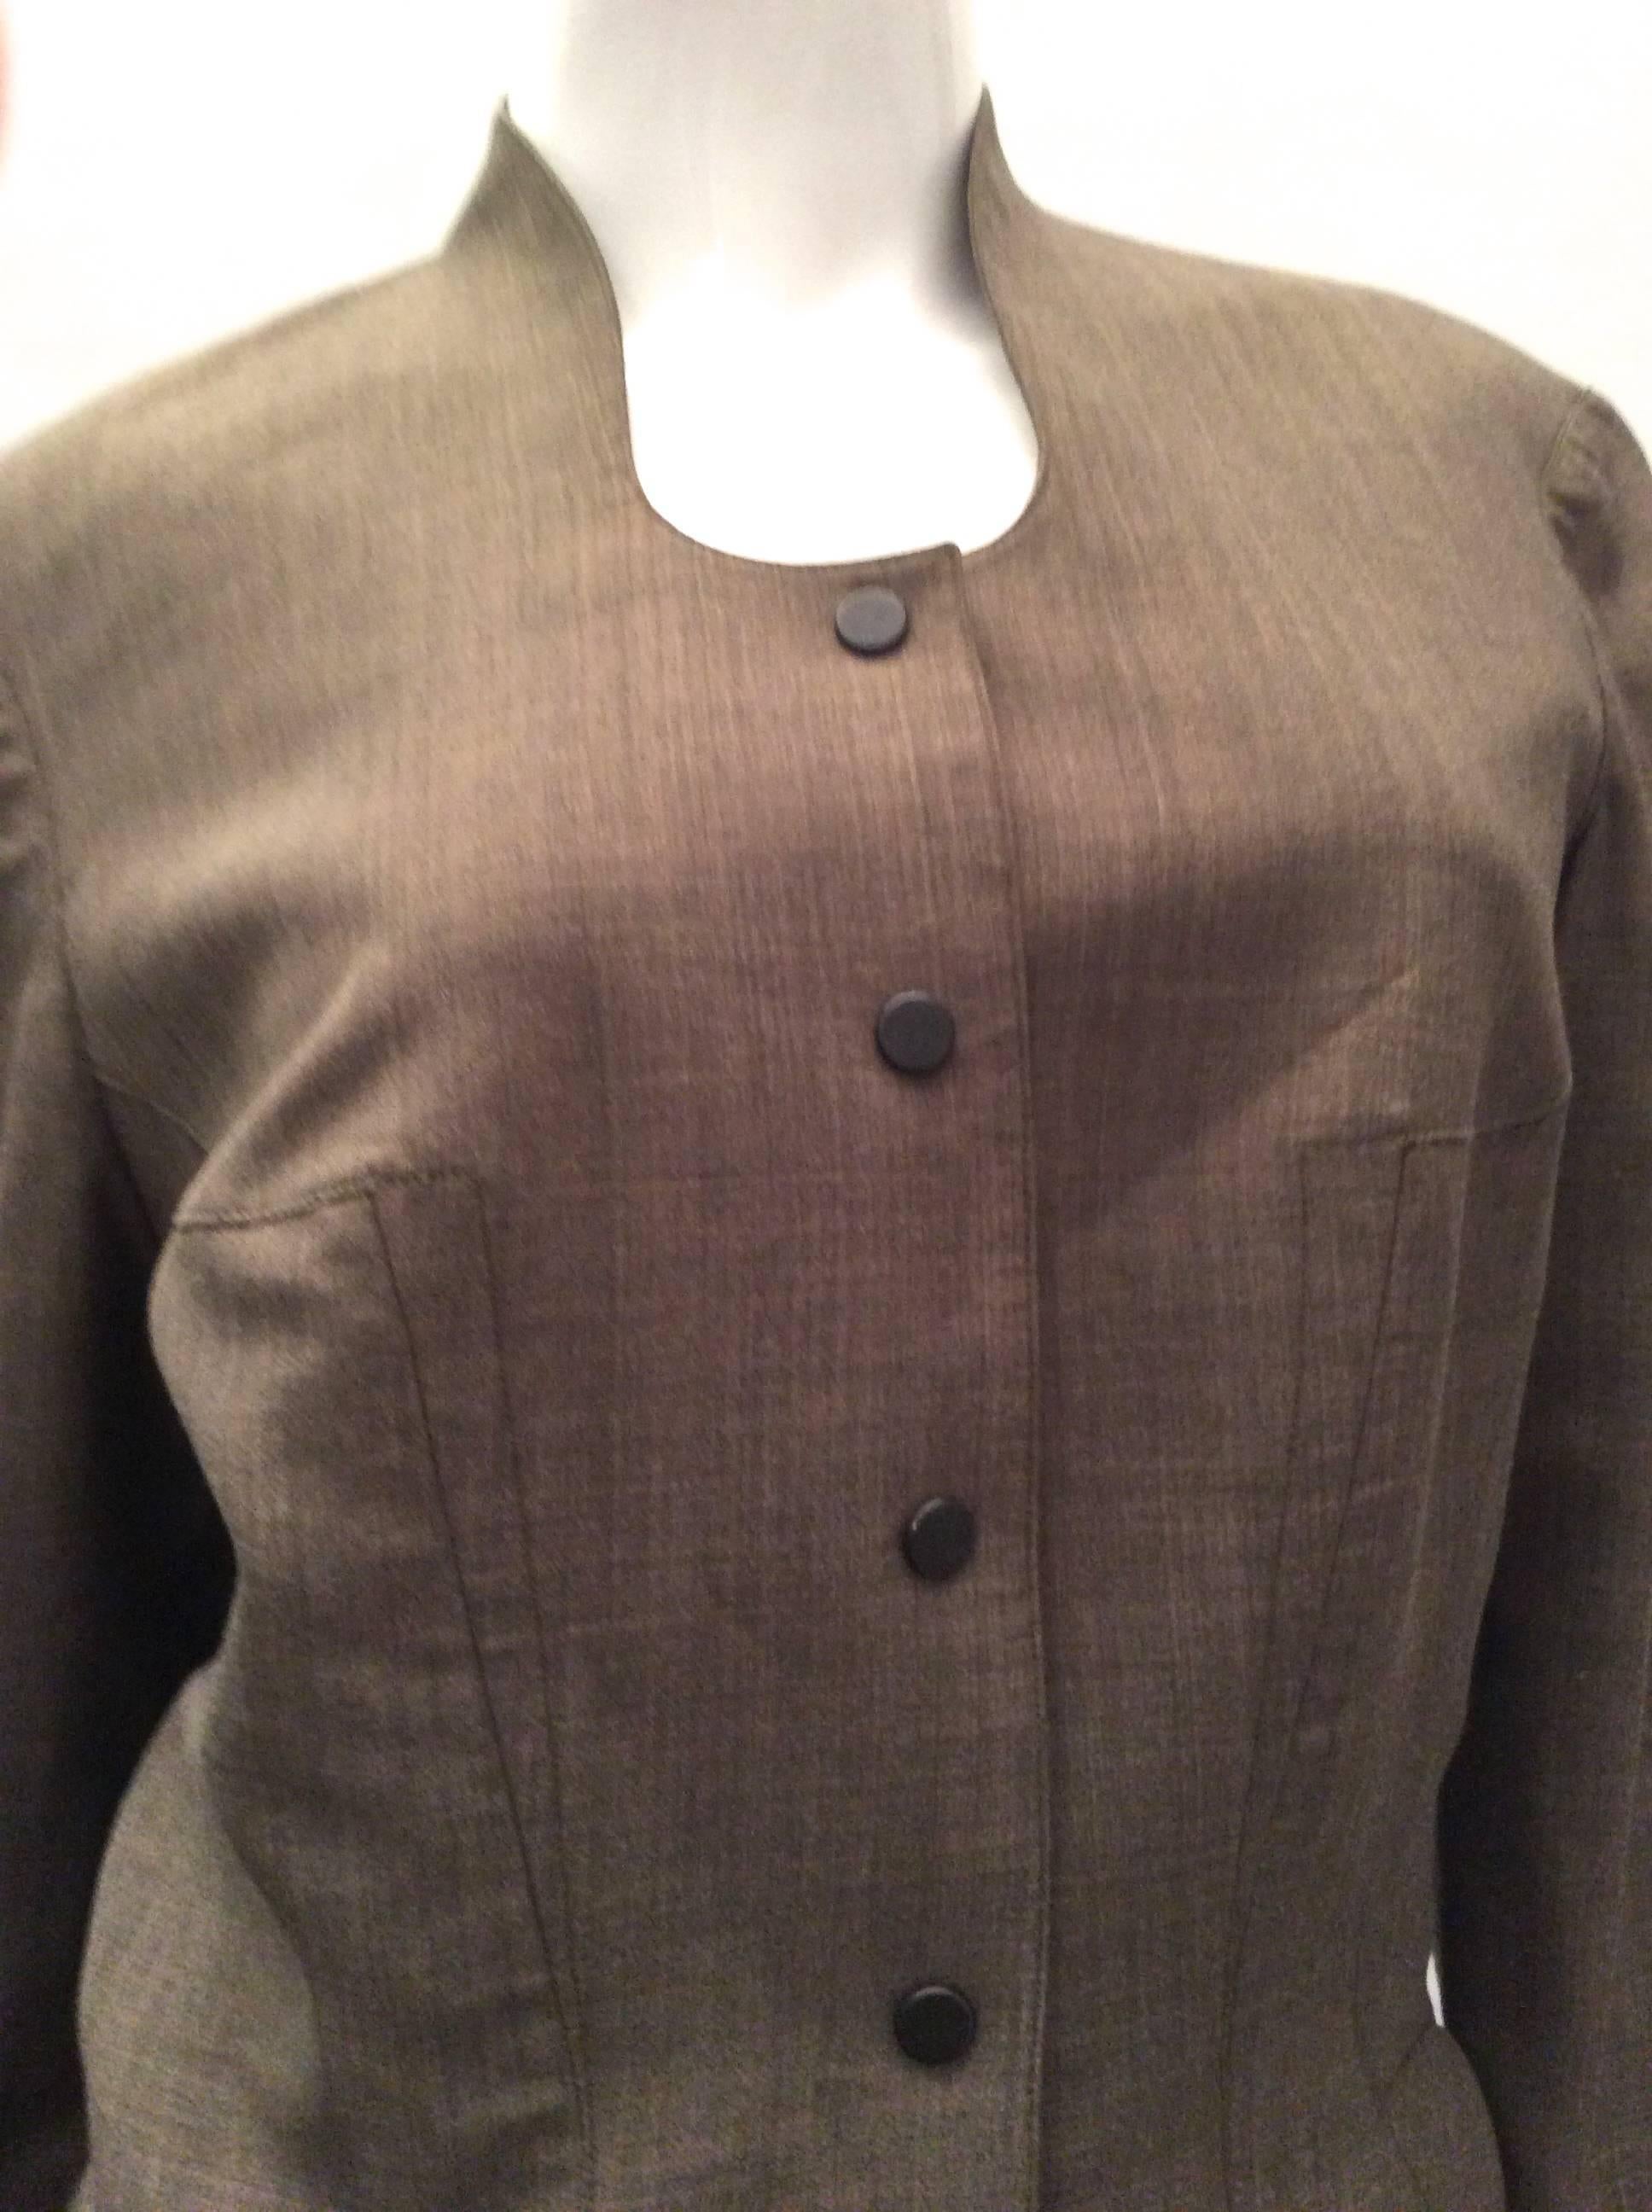 Thierry Mugler 2 Piece Suit  In Excellent Condition For Sale In Boca Raton, FL